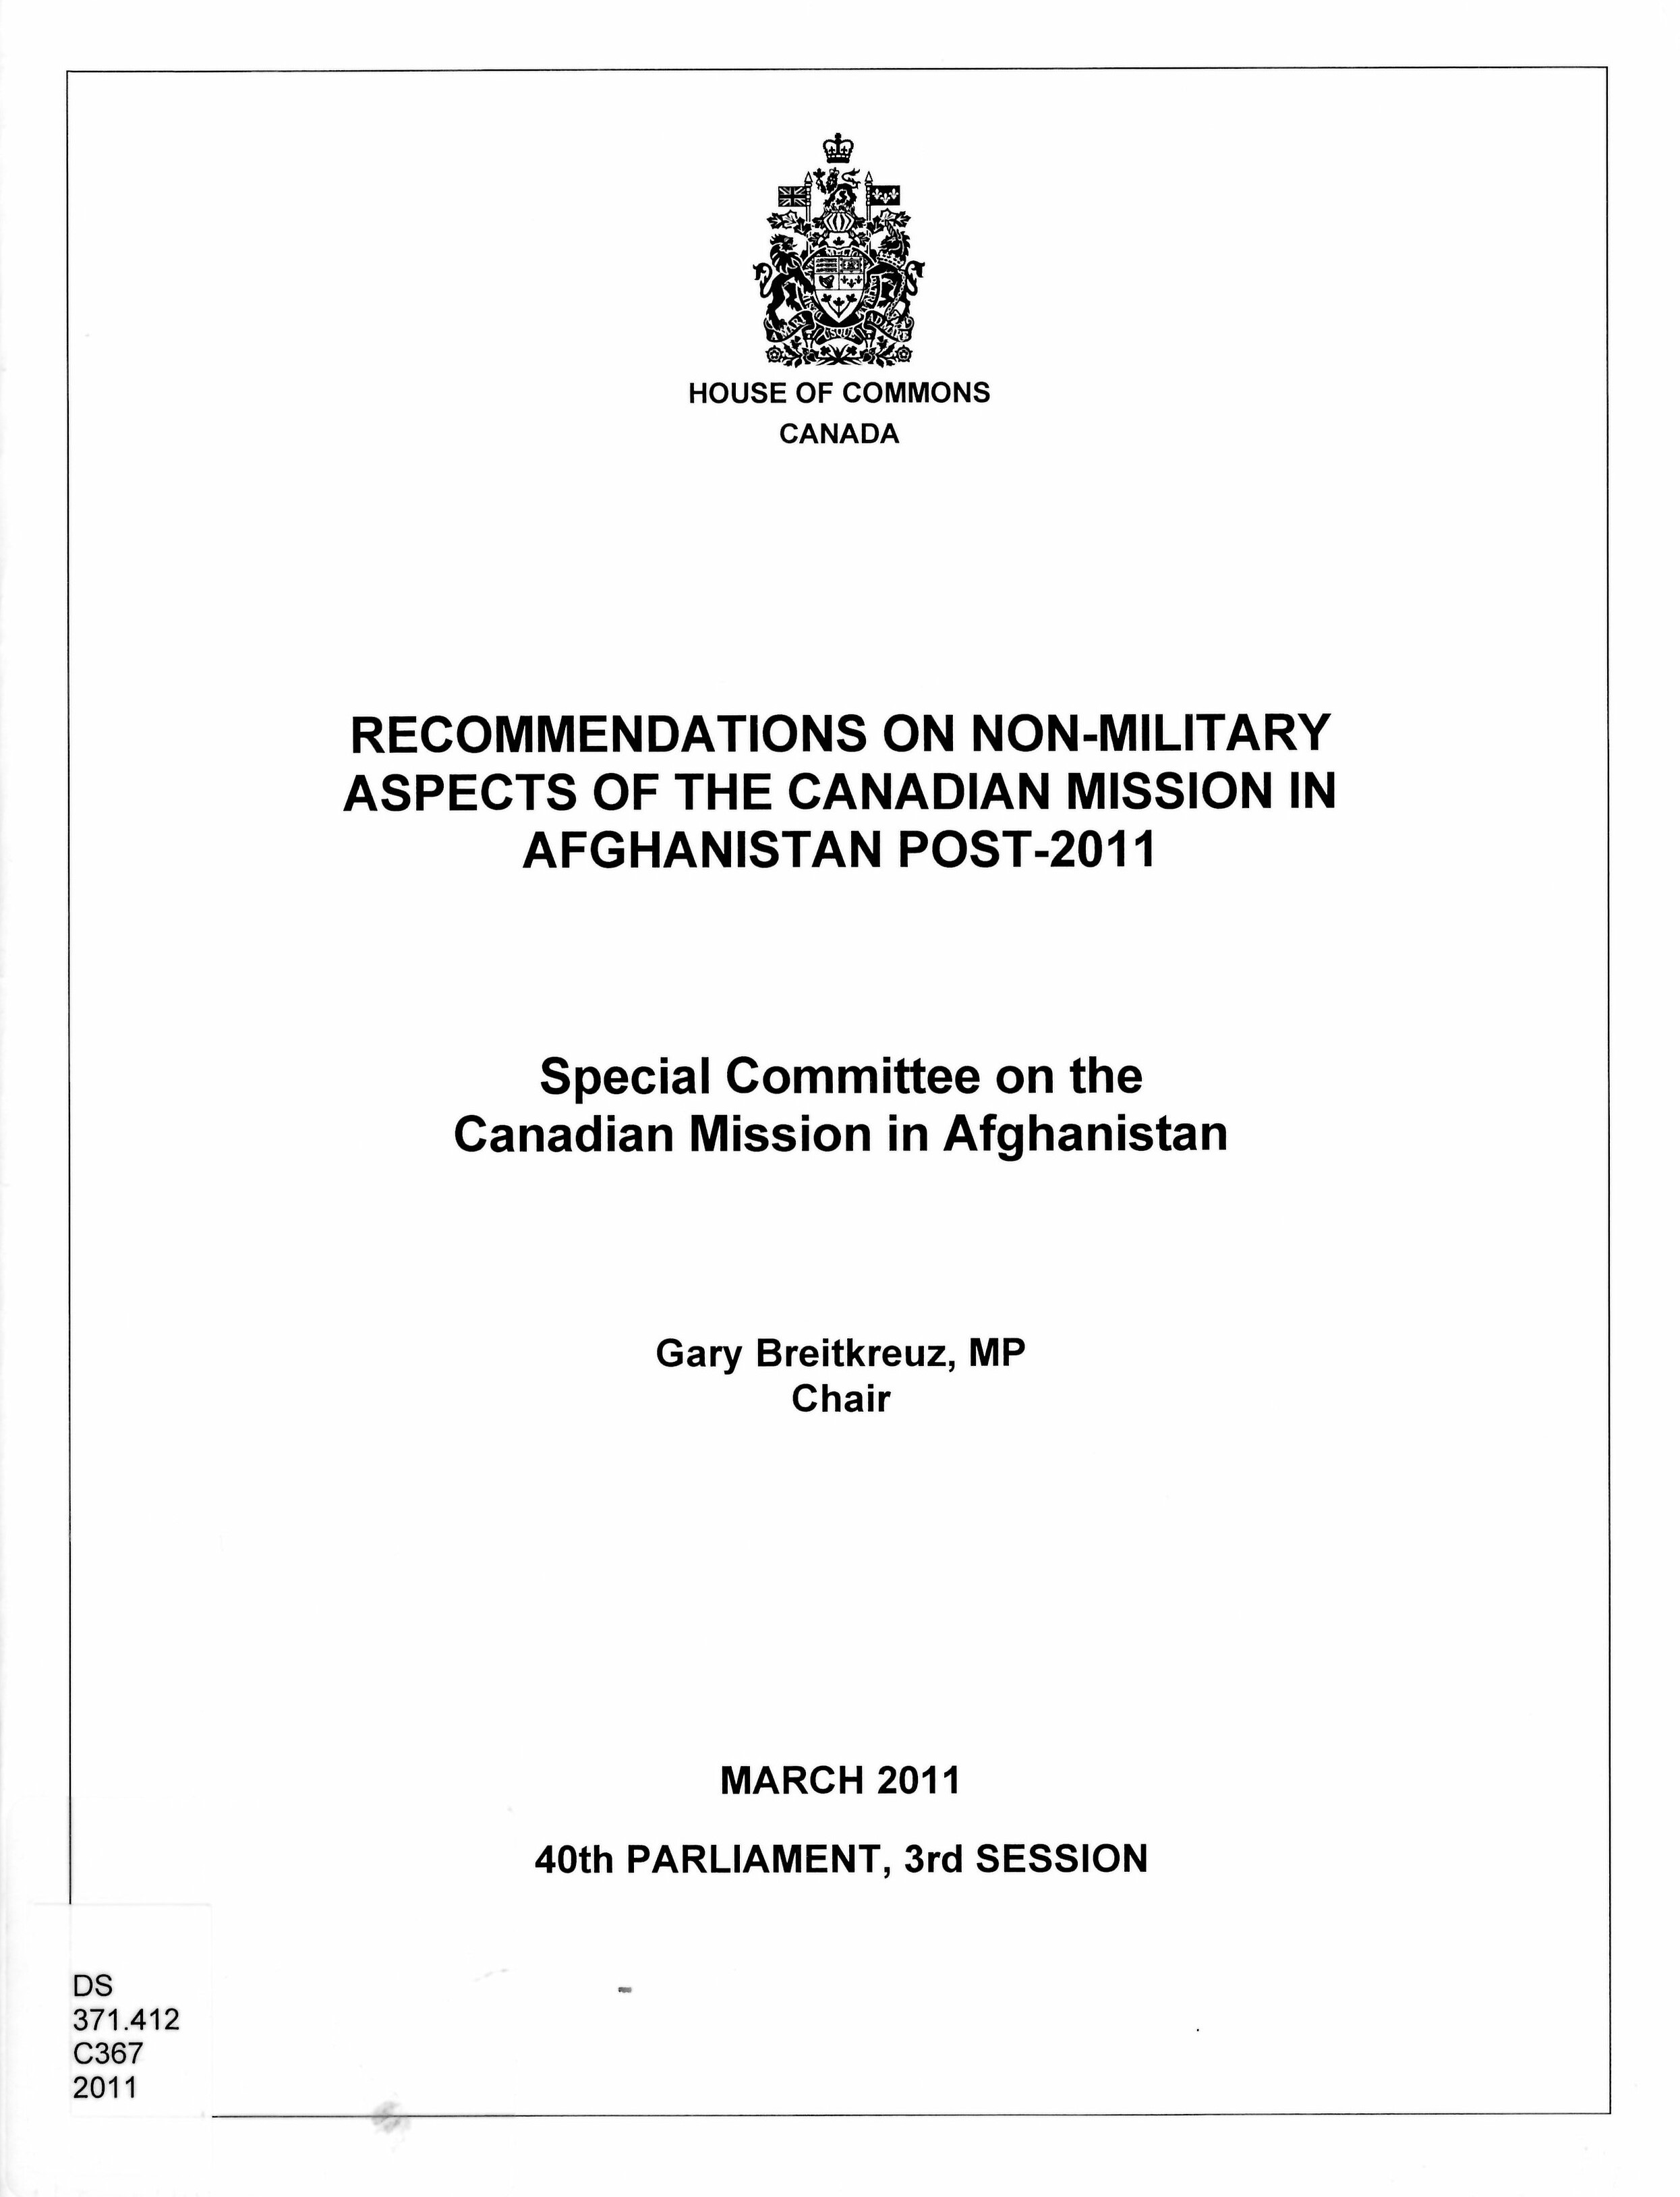 Recommendations on non-military aspects of the Canadian mission in Afghanistan post-2011